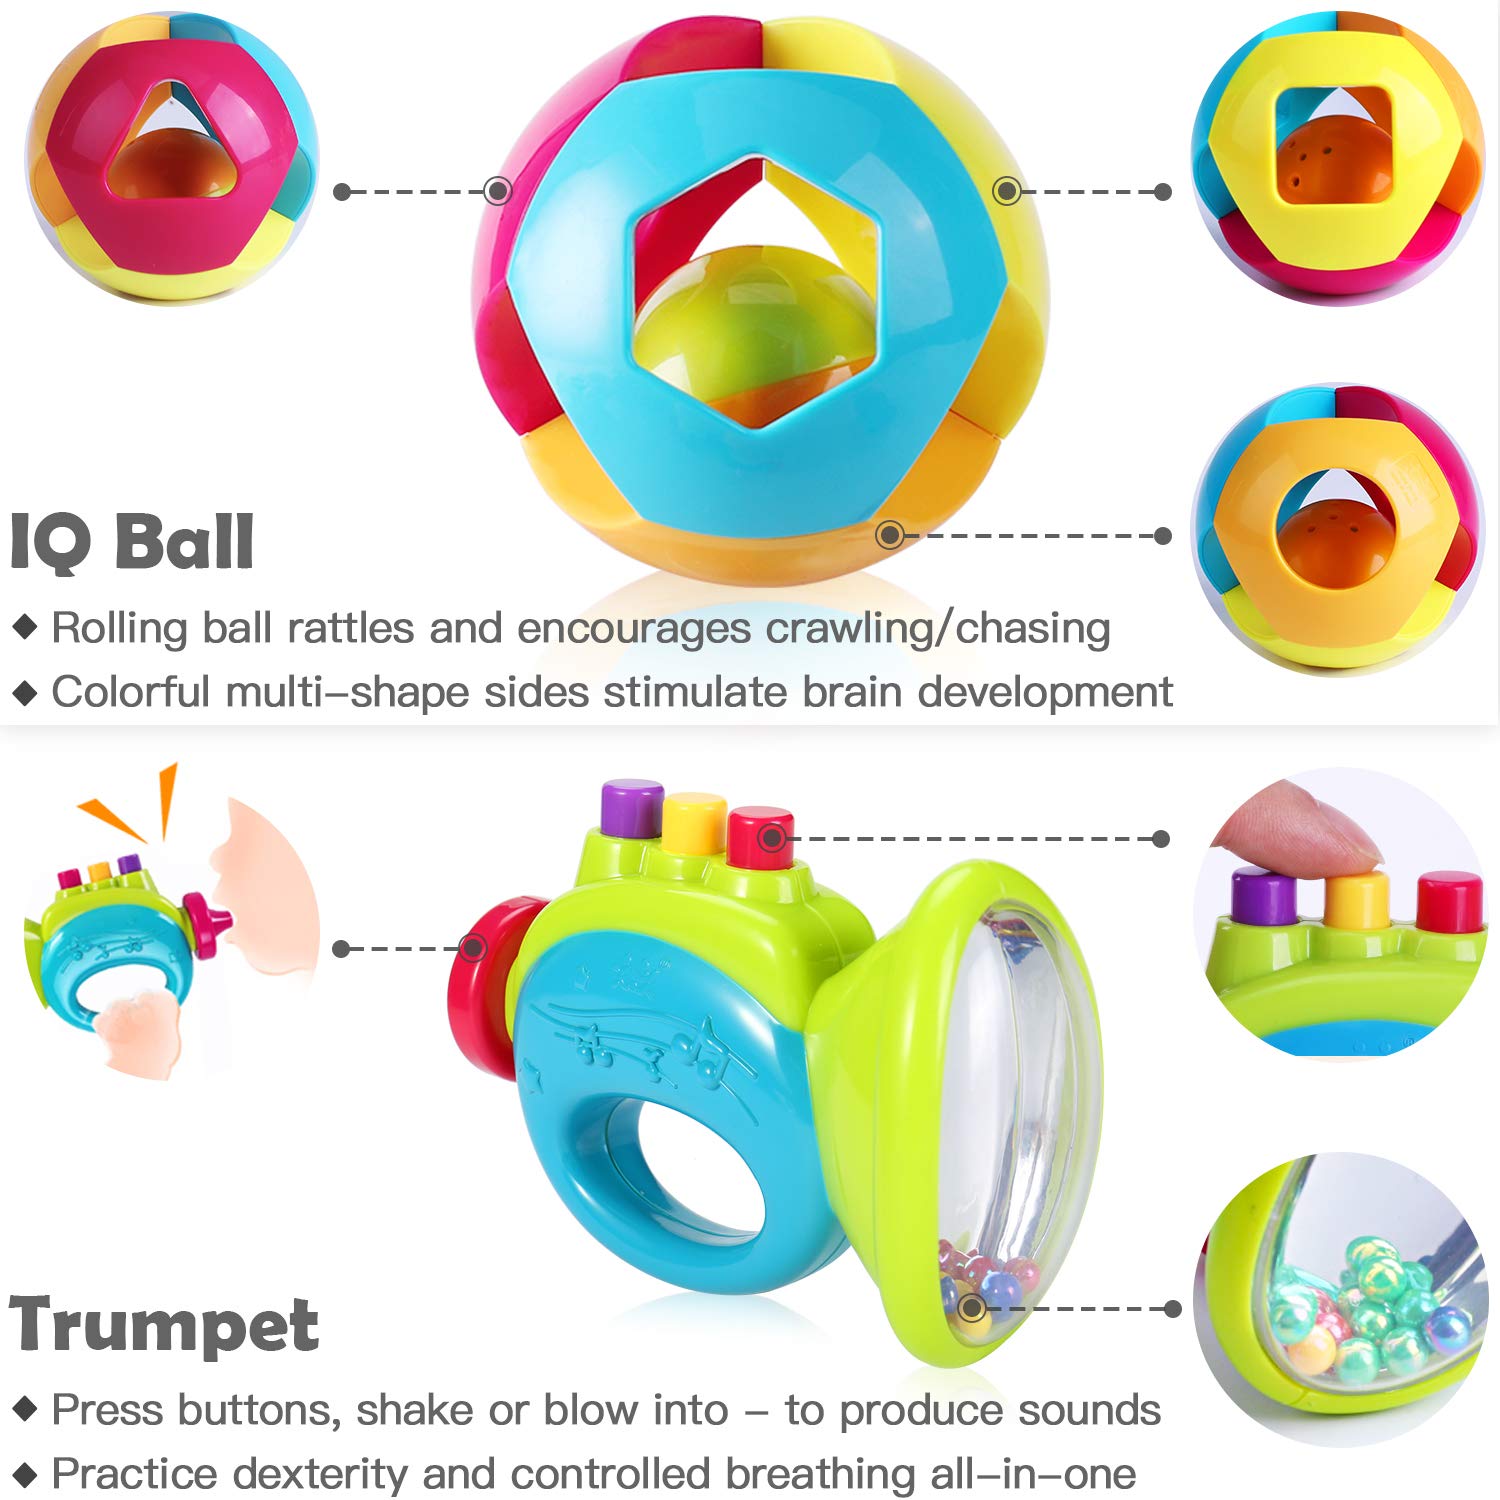 iPlay, iLearn 10pcs Baby Rattle Toys, Infant Shaker, Teether, Grab and Spin Rattles, Musical Toy Set, Early Educational, Newborn Baby Gifts for 0, 3, 6, 9, 12 Months, Girls, Boys